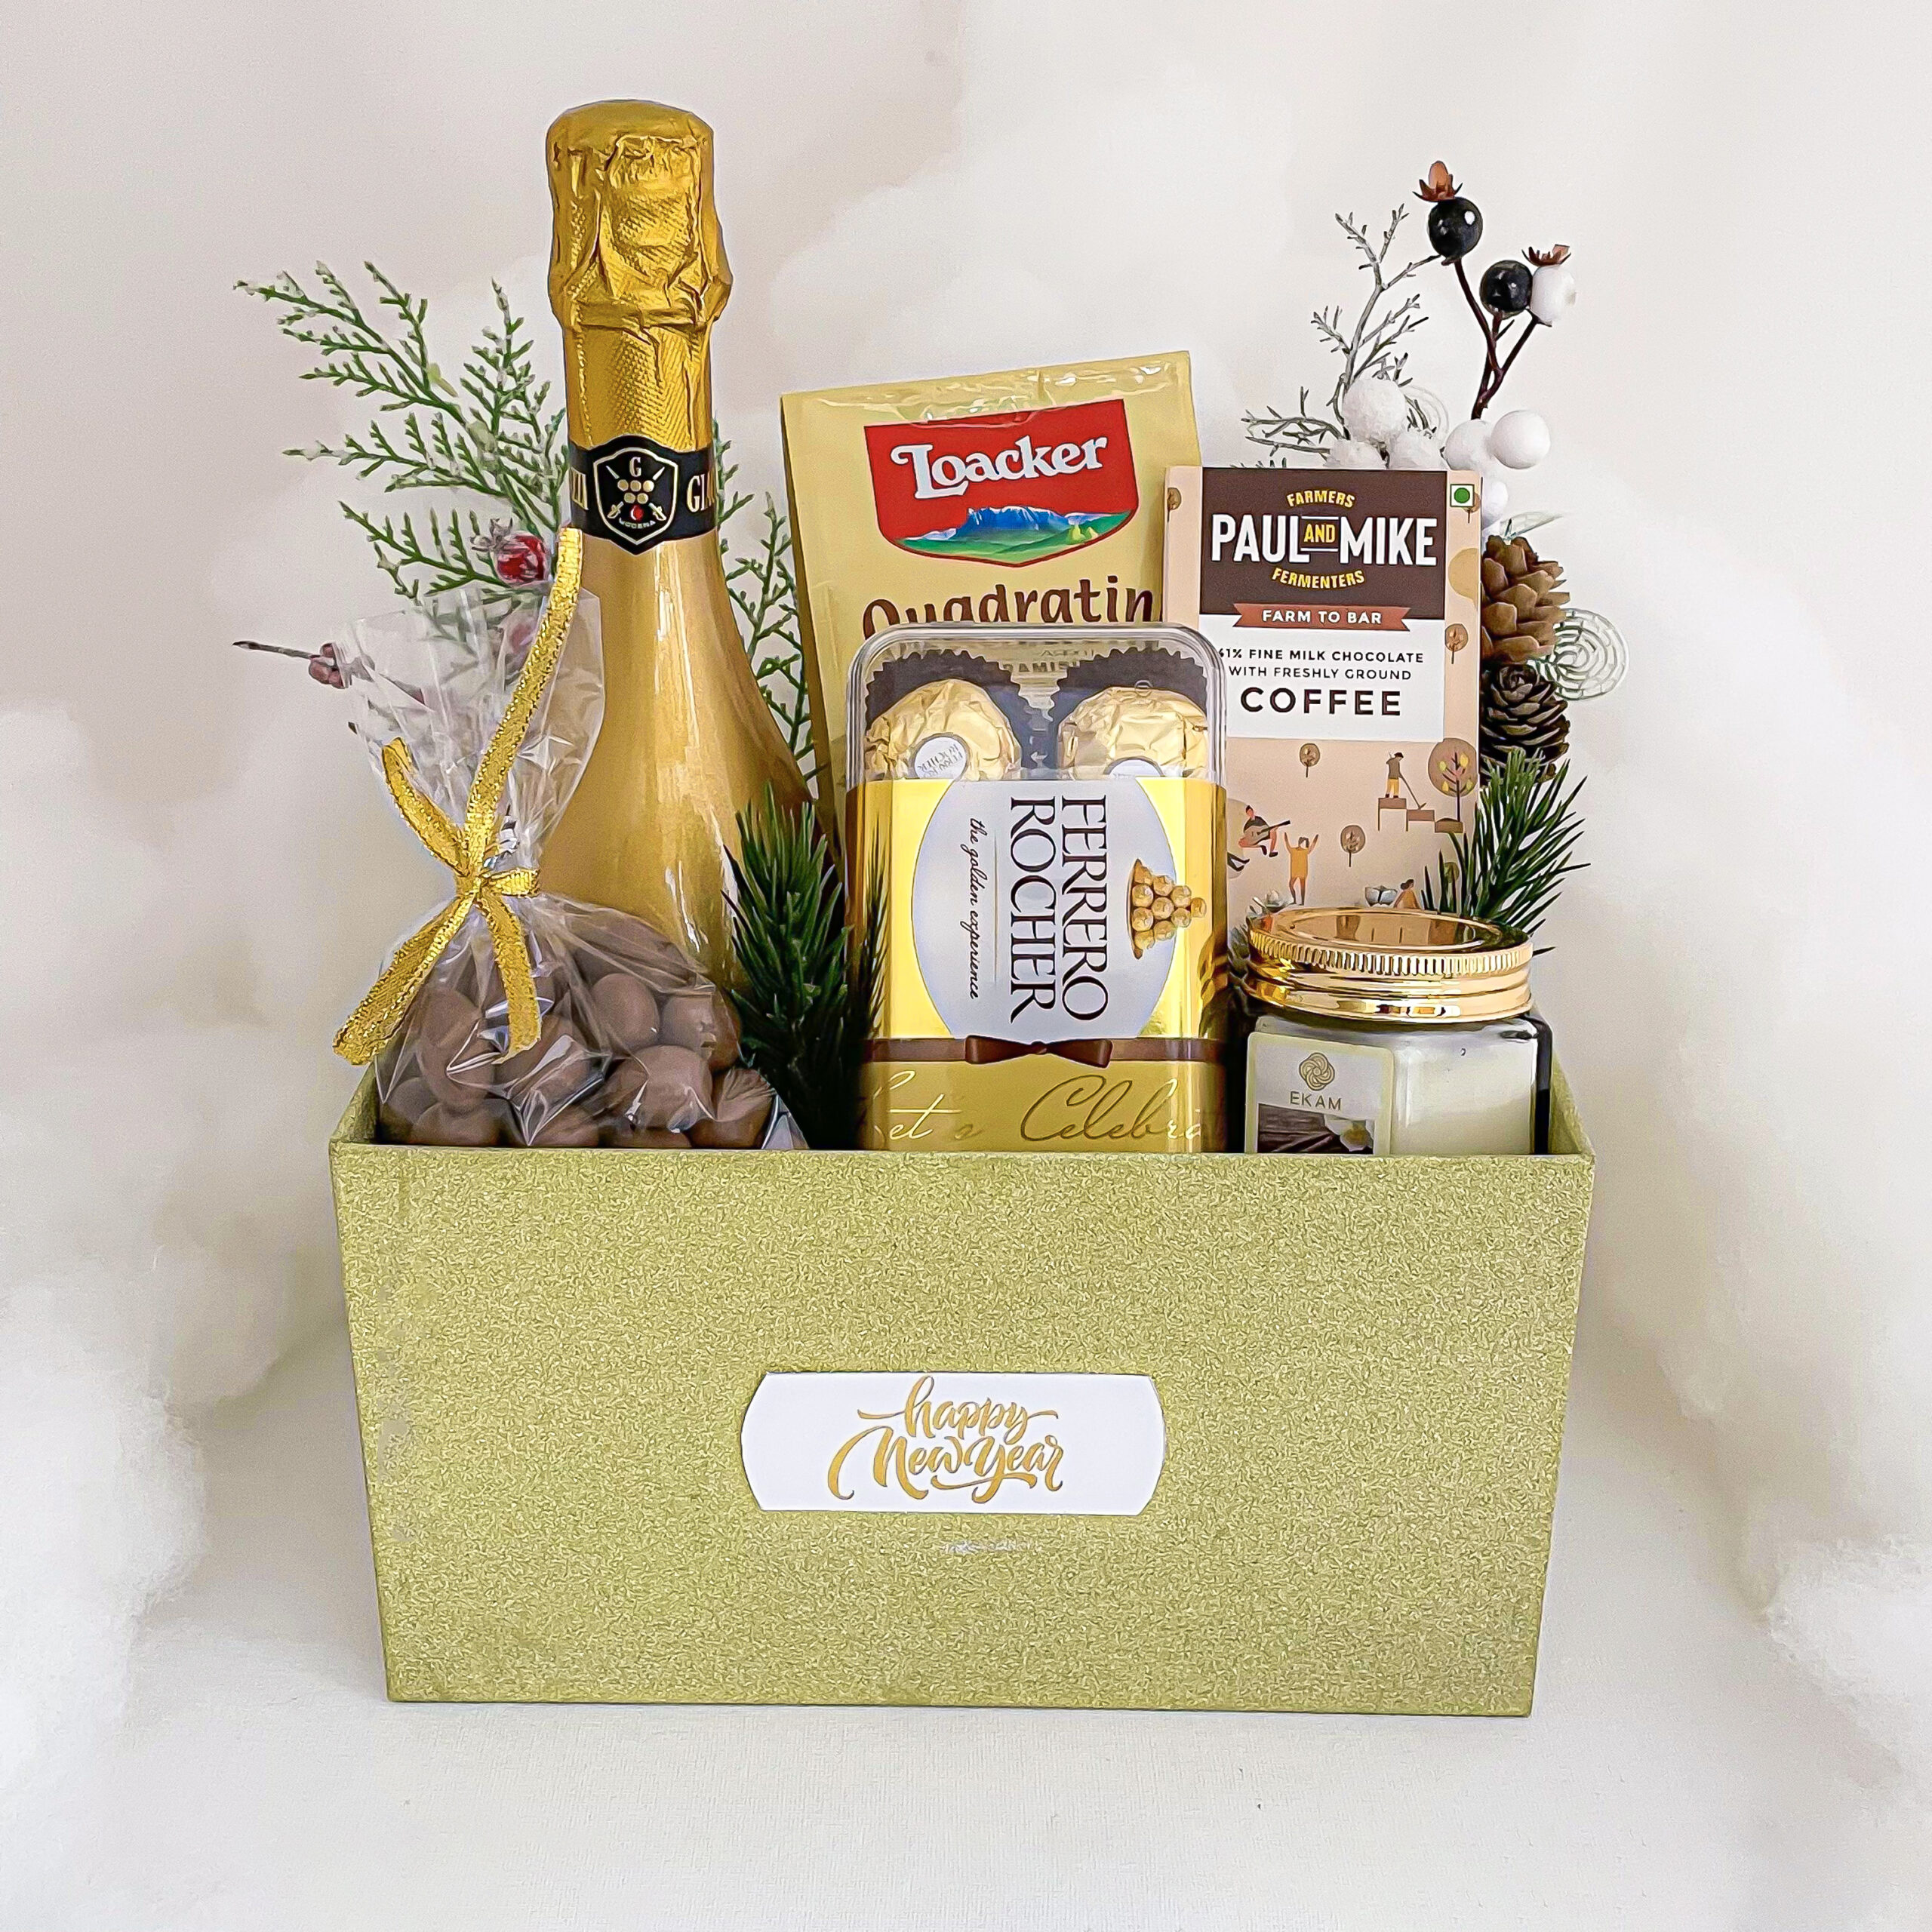 Festive Easter Gift Tray With Premium Chocolates, Chocolate Coated Dry Fruits, Wine And More